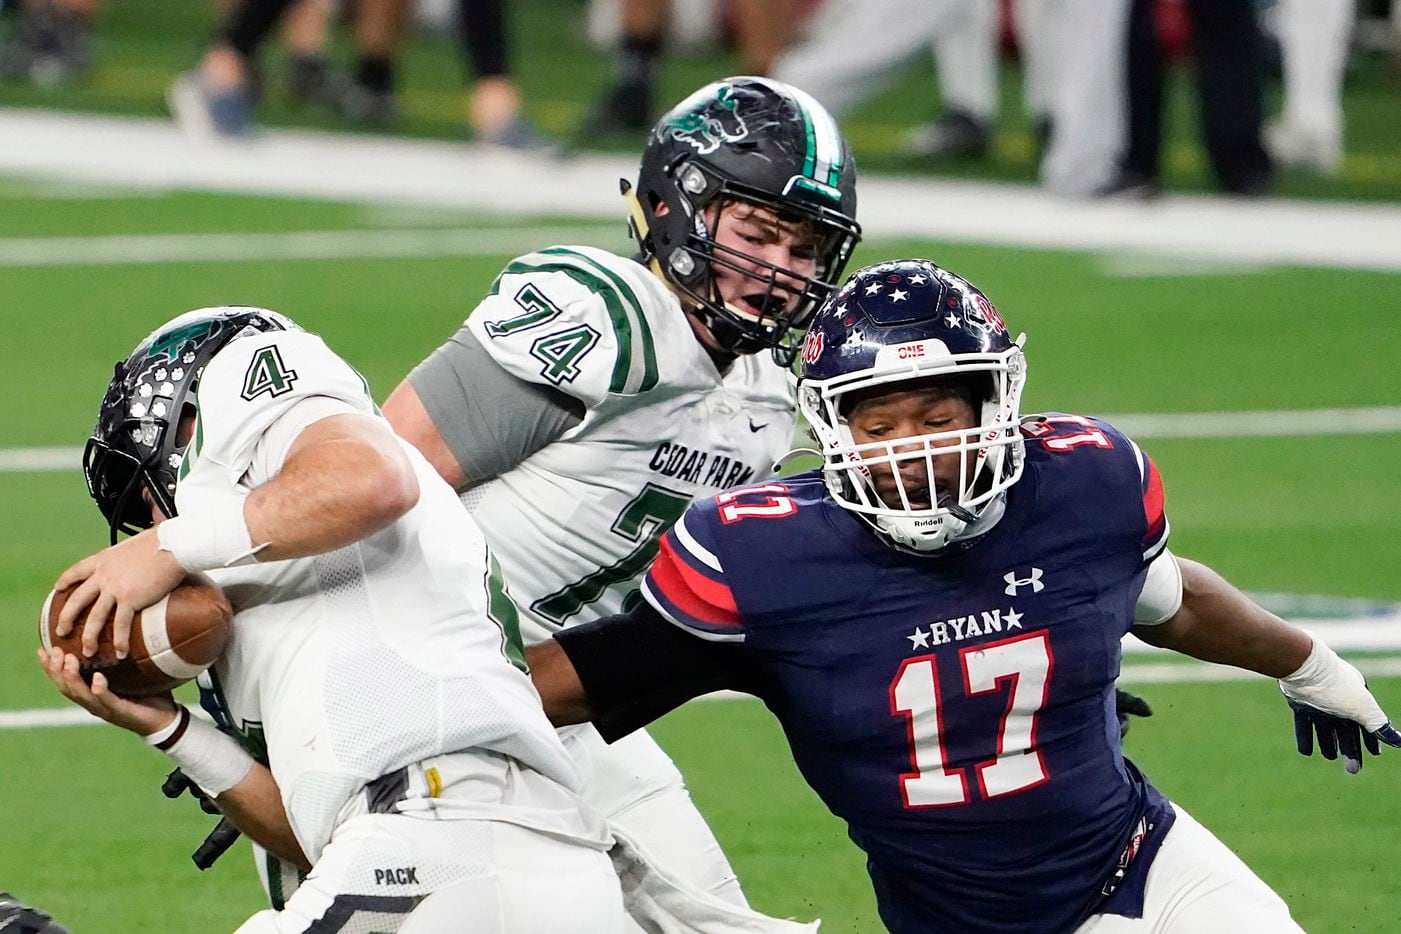 Cedar Park quarterback Ryder Hernandez (4) tries to spin away from Denton Ryan defensive lineman Michael Gee (17) during the second half of the Class 5A Division I state football championship game at AT&T Stadium on Friday, Jan. 15, 2021, in Arlington, Texas. Ryan won the game 59-14. (Smiley N. Pool/The Dallas Morning News)